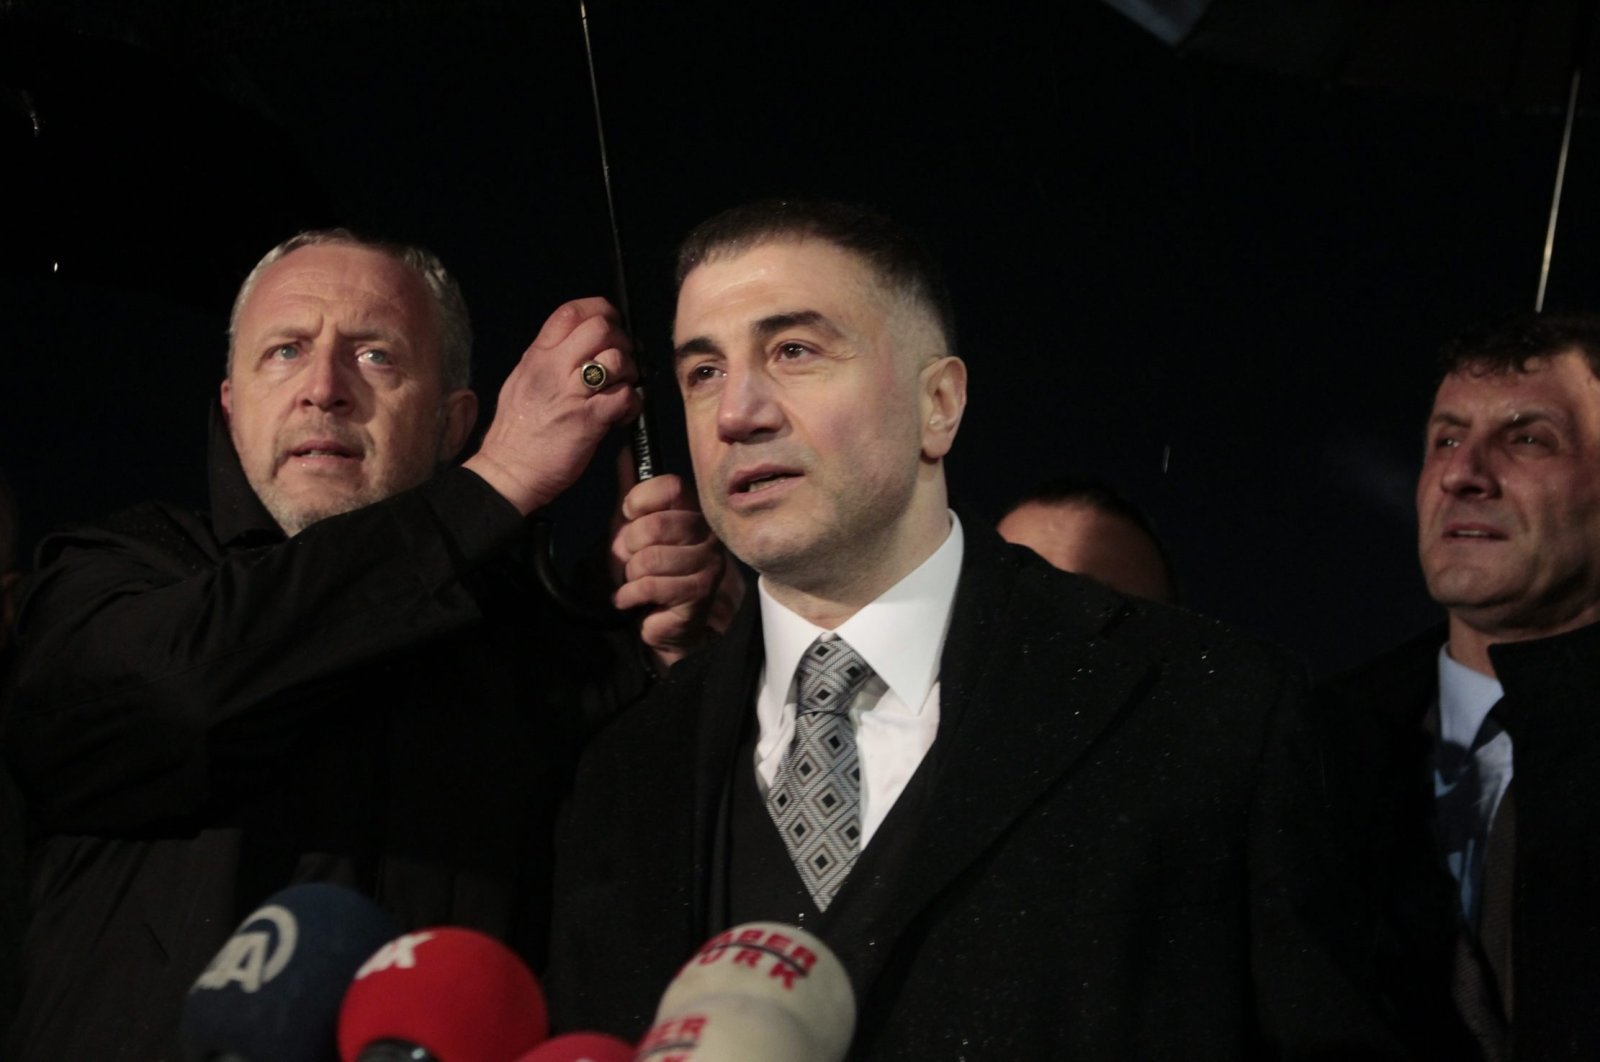 Turkish mobster Sedat Peker speaks to the press after his release from prison in Silivri, Istanbul, March 3, 2014. (Sabah Photo/Metin Arabacı)